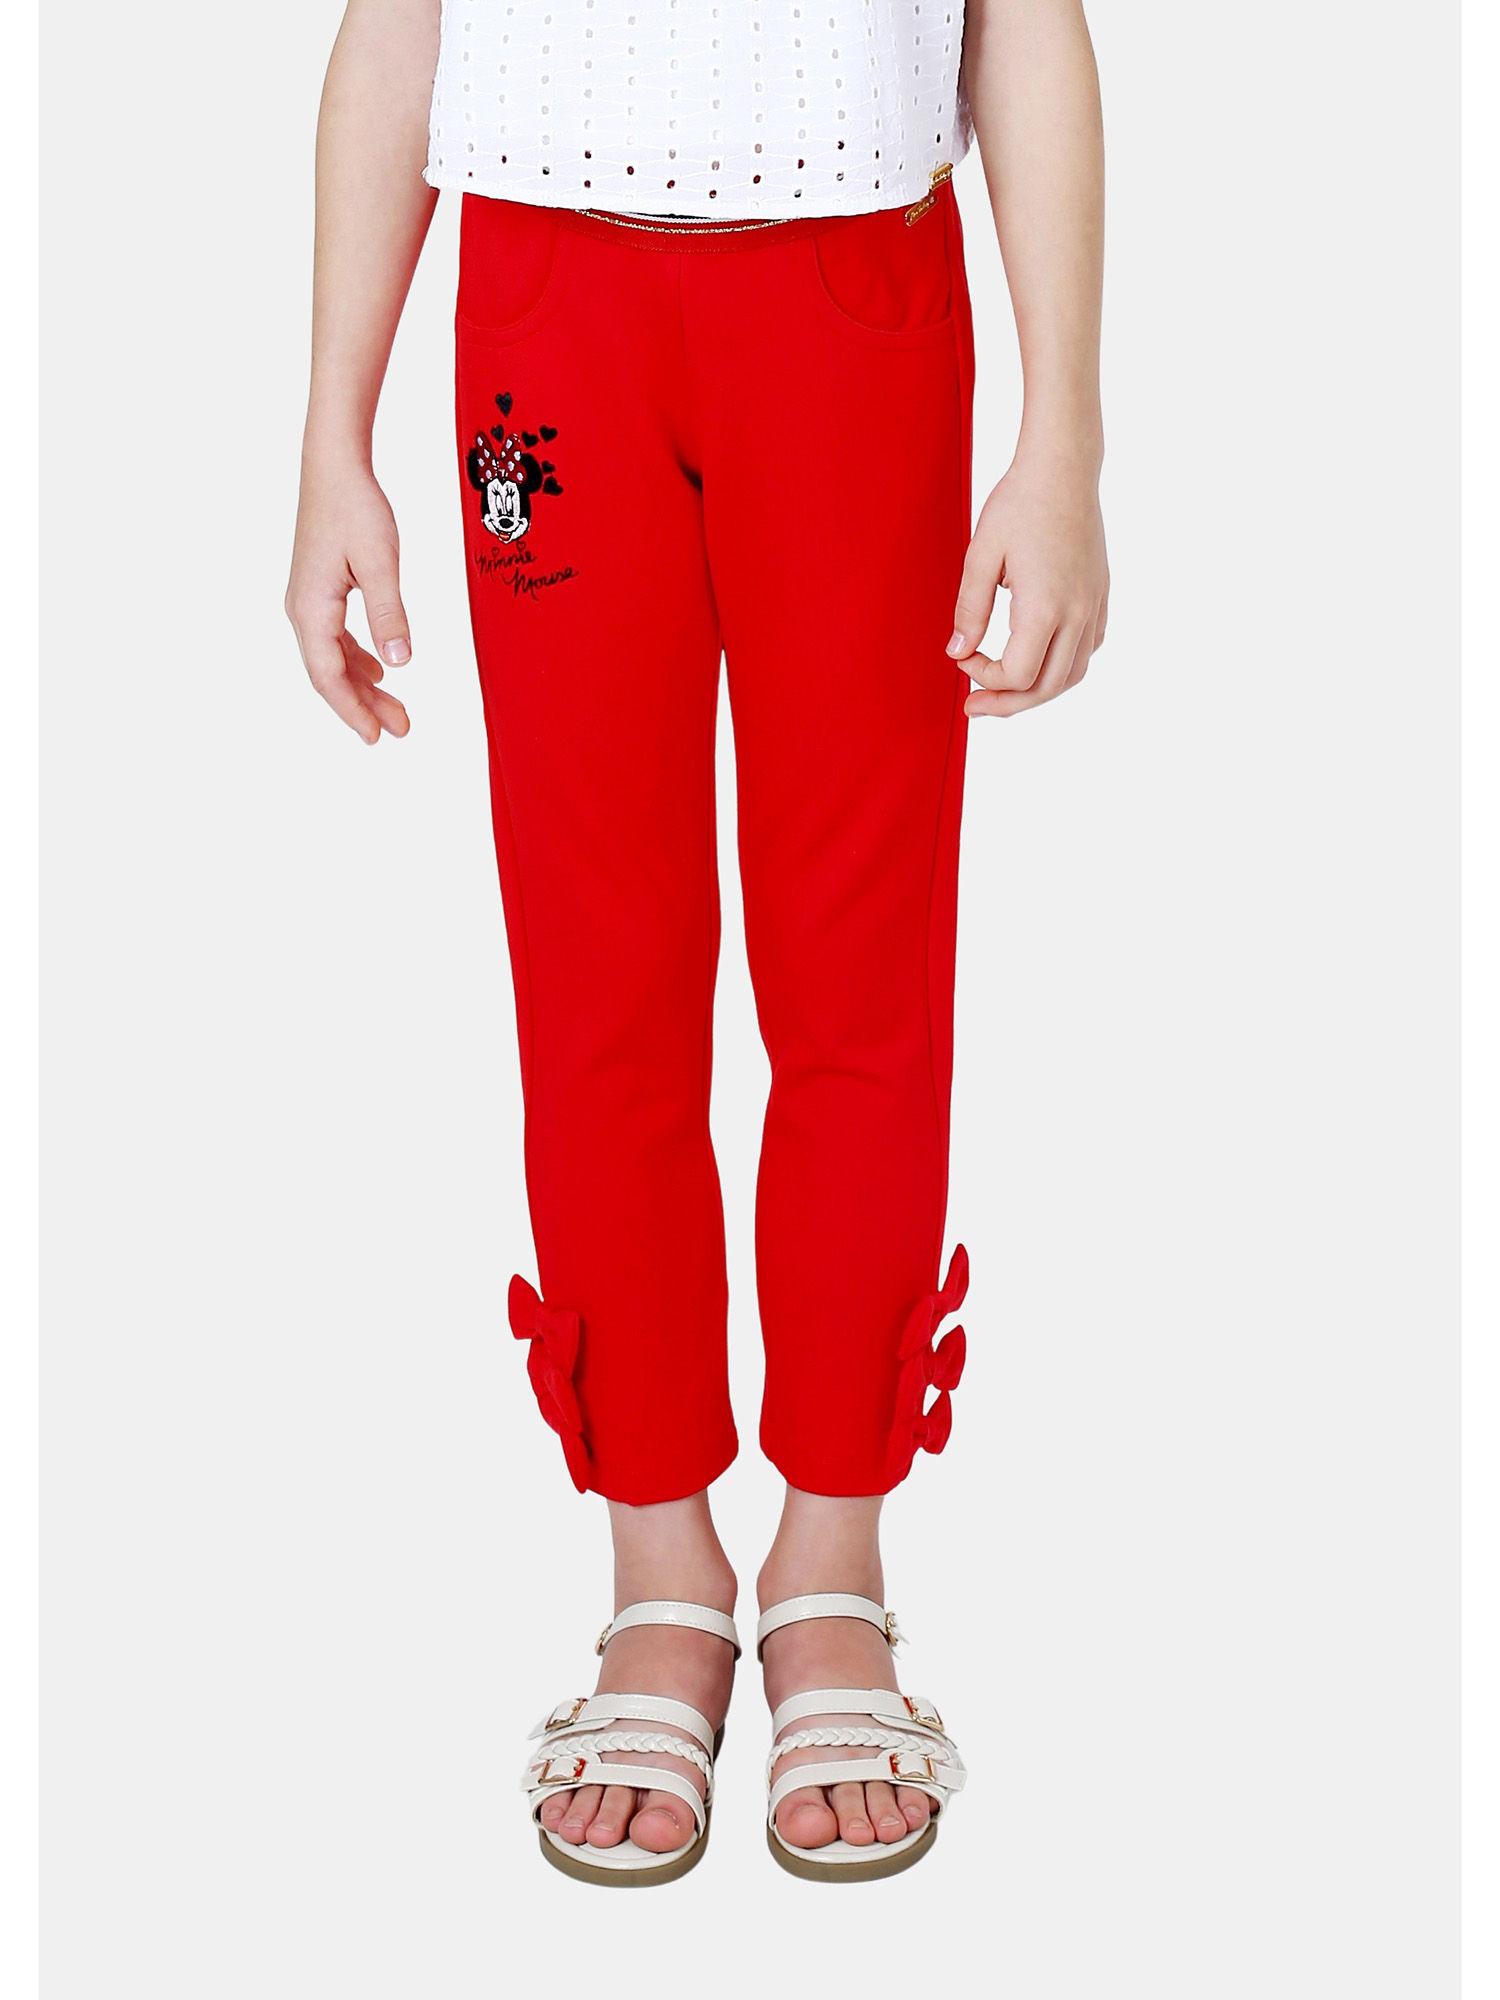 red minnie mouse leggings